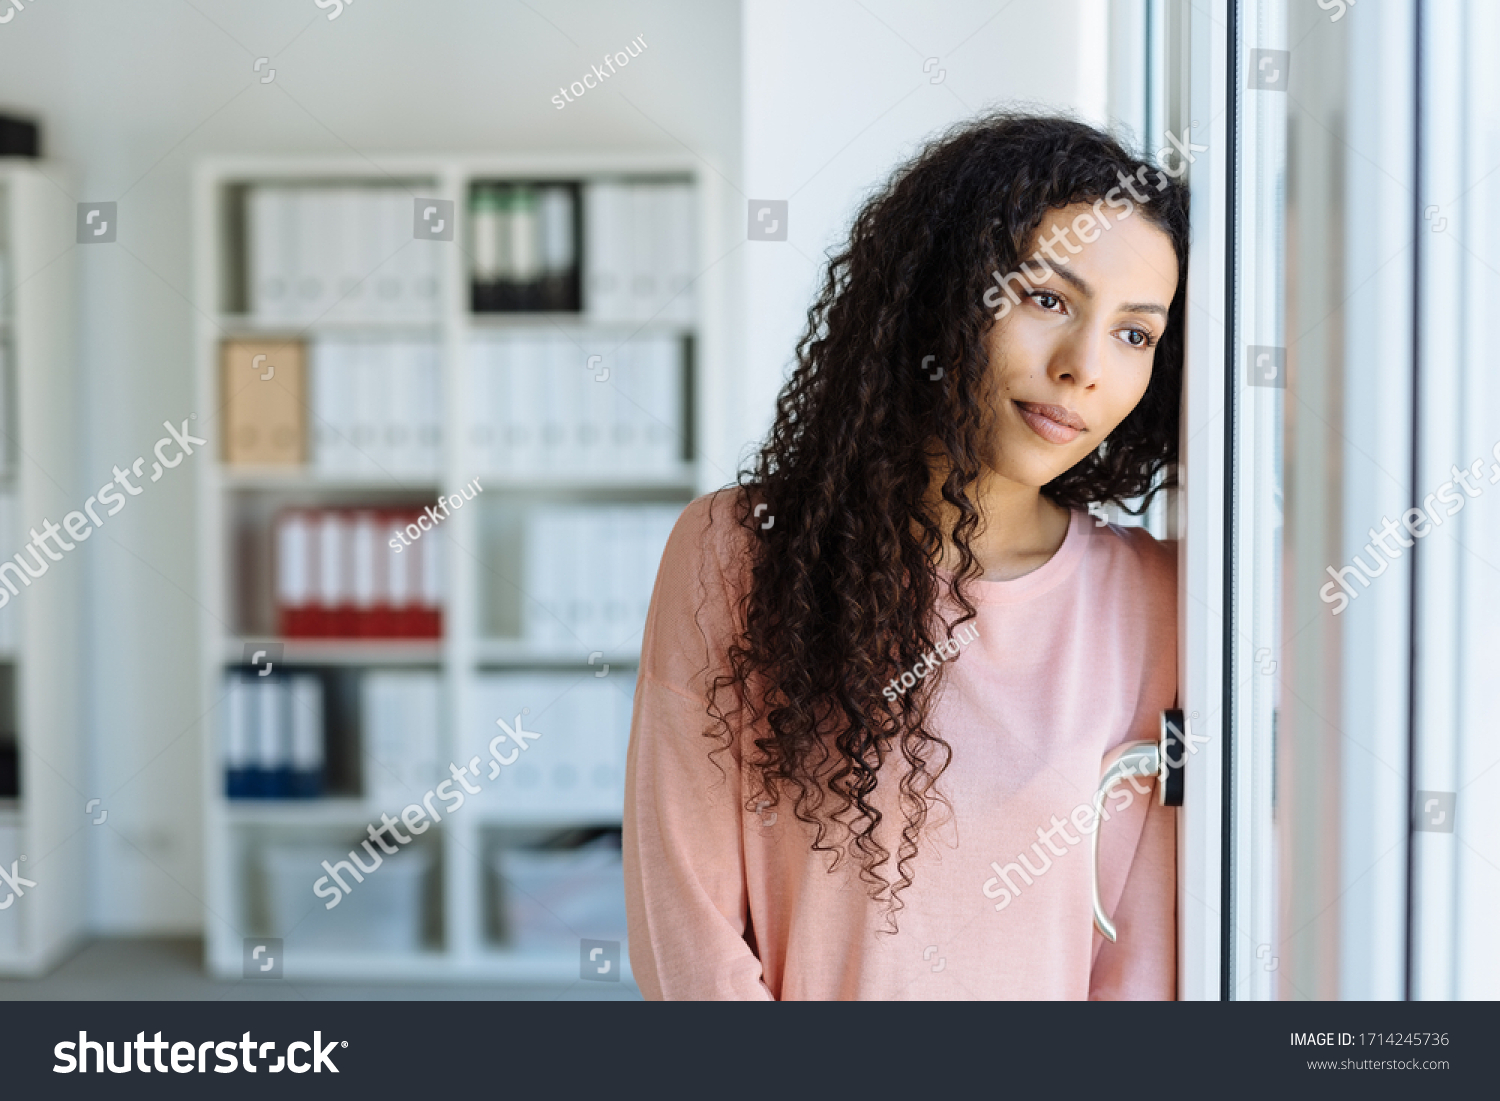 Young woman staring longingly through a window with a sad faraway expression as she leans against a wall in an office #1714245736